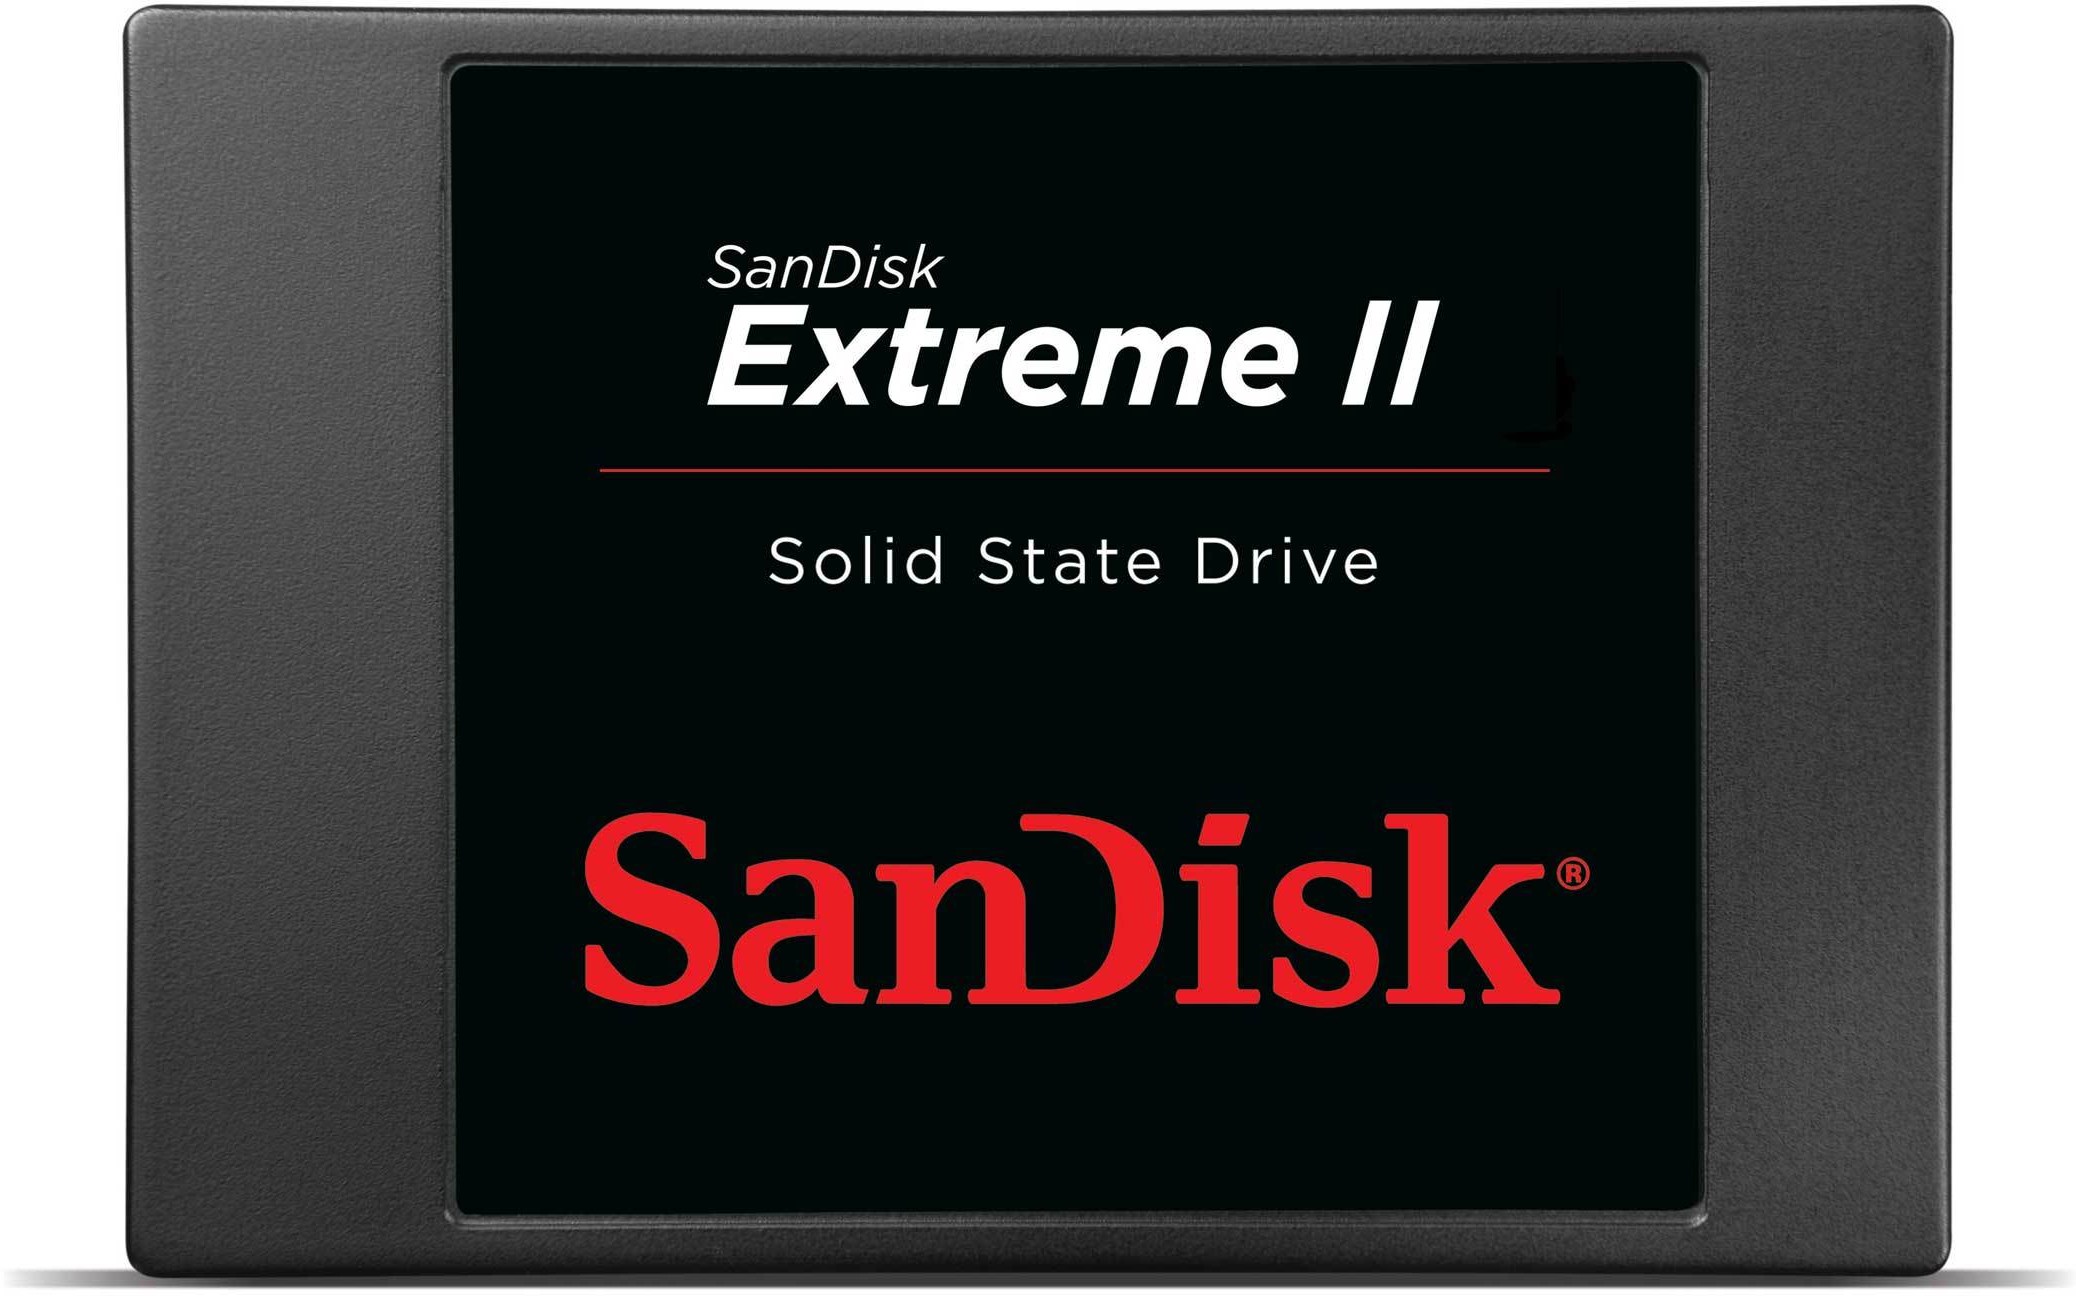 Media asset in full size related to 3dfxzone.it news item entitled as follows: SanDisk lancia gli SSD Extreme II per desktop, notebook e tablet | Image Name: news19639_SSD-SanDisk-Extreme-II_1.jpg